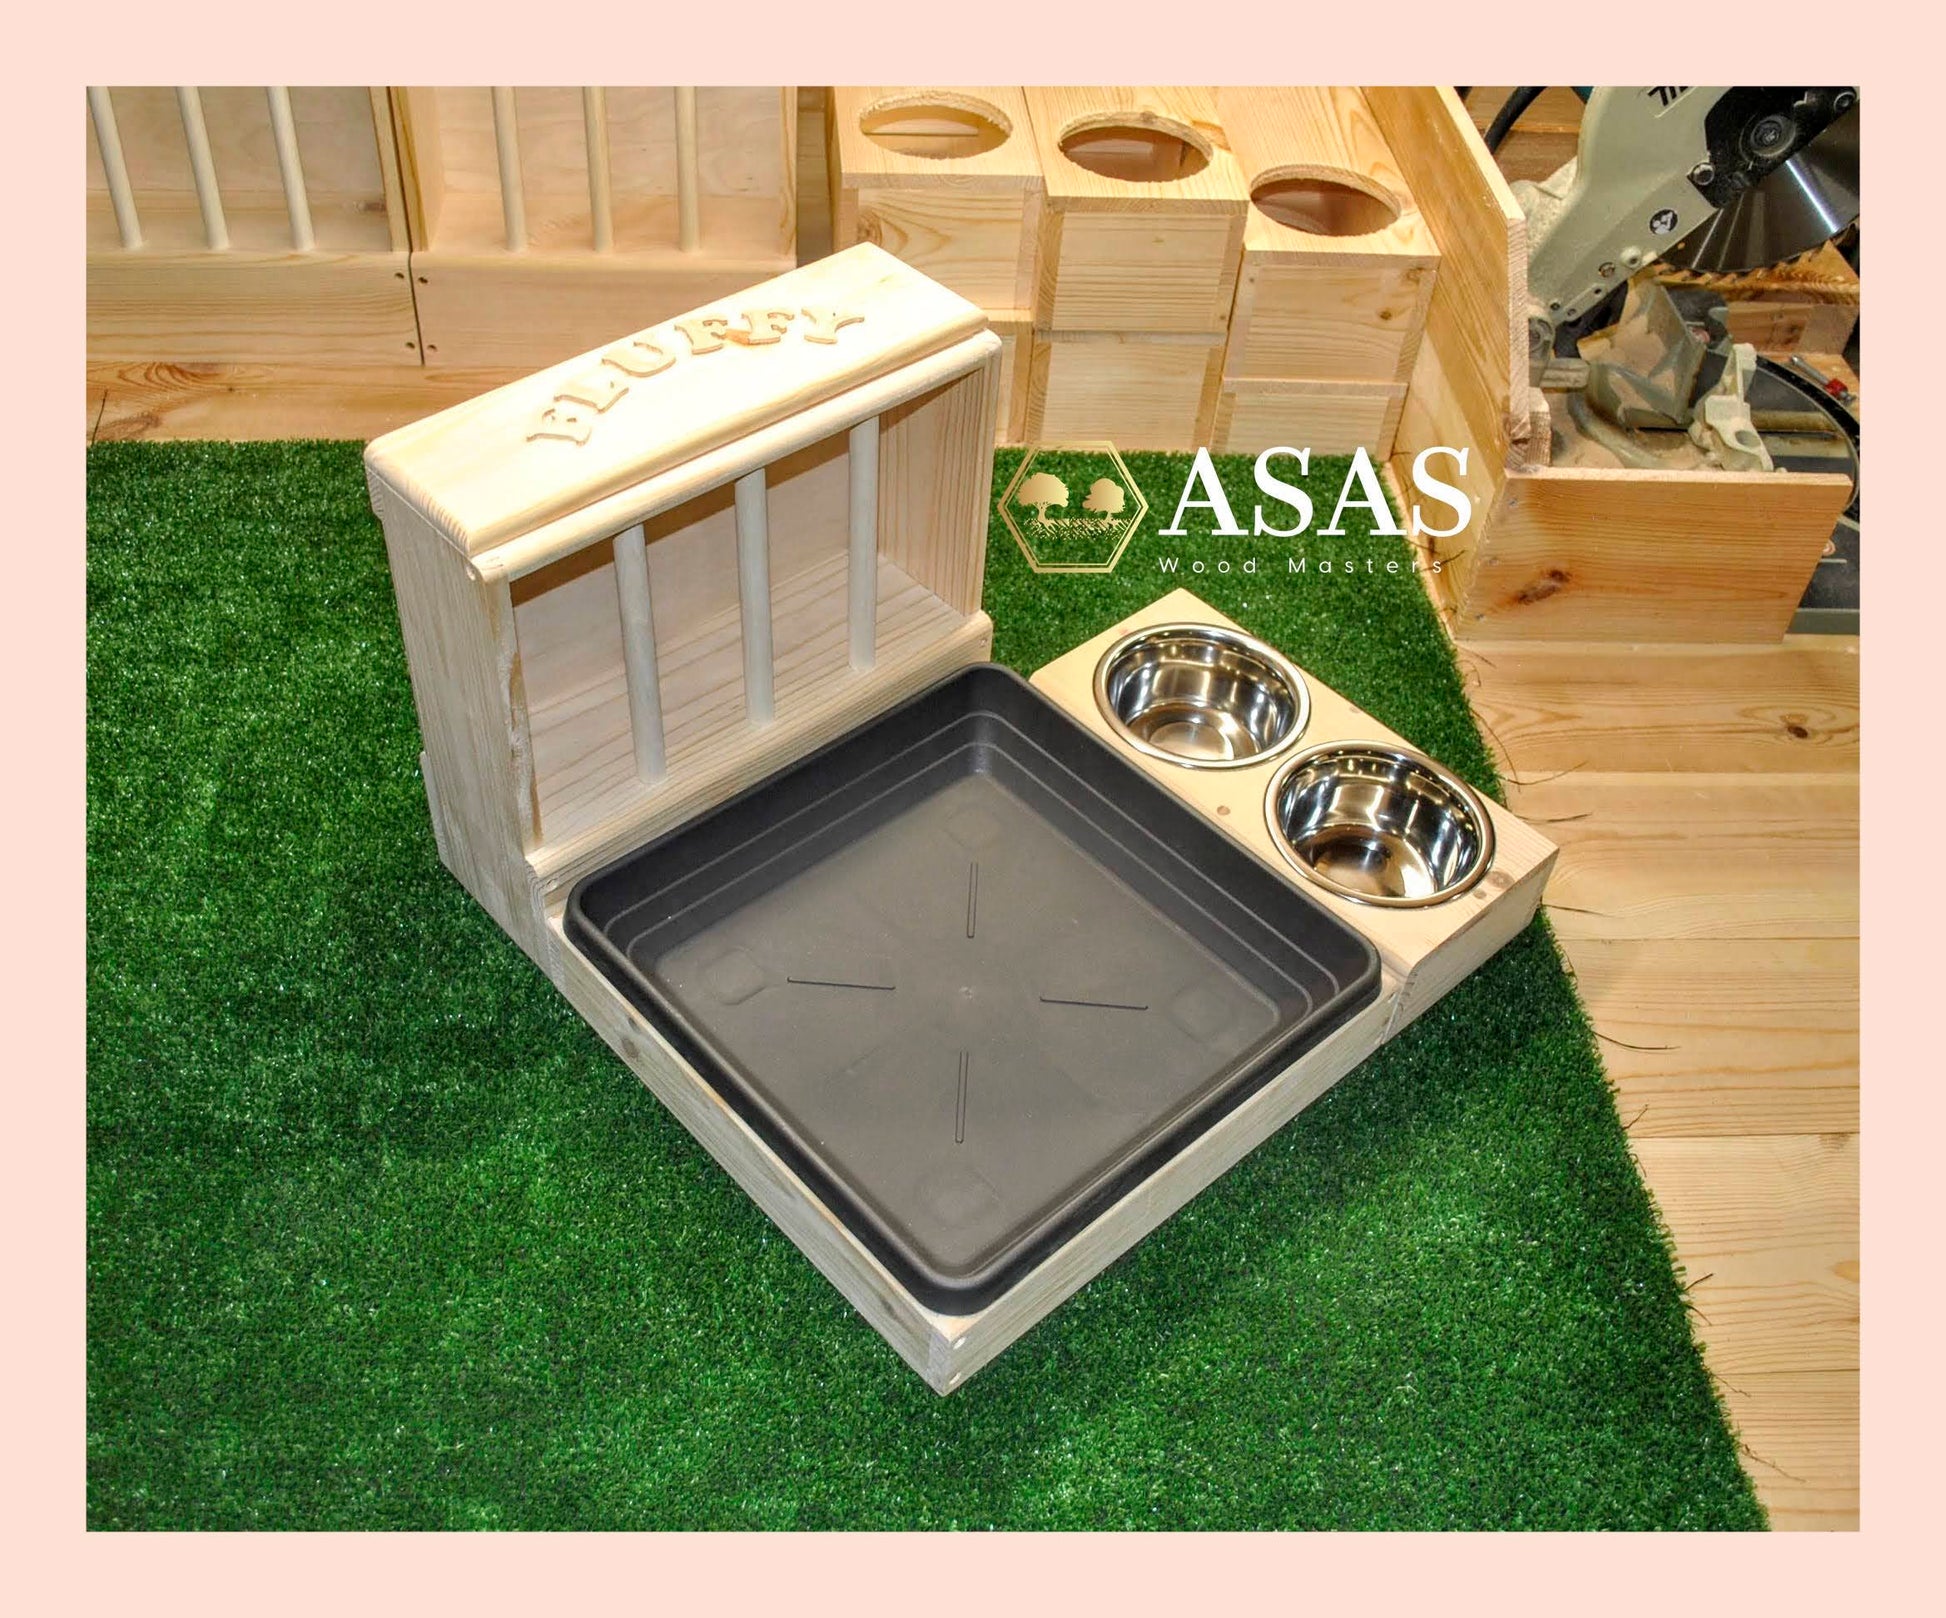 rabbit hay feeder with litter box, made by asaswood